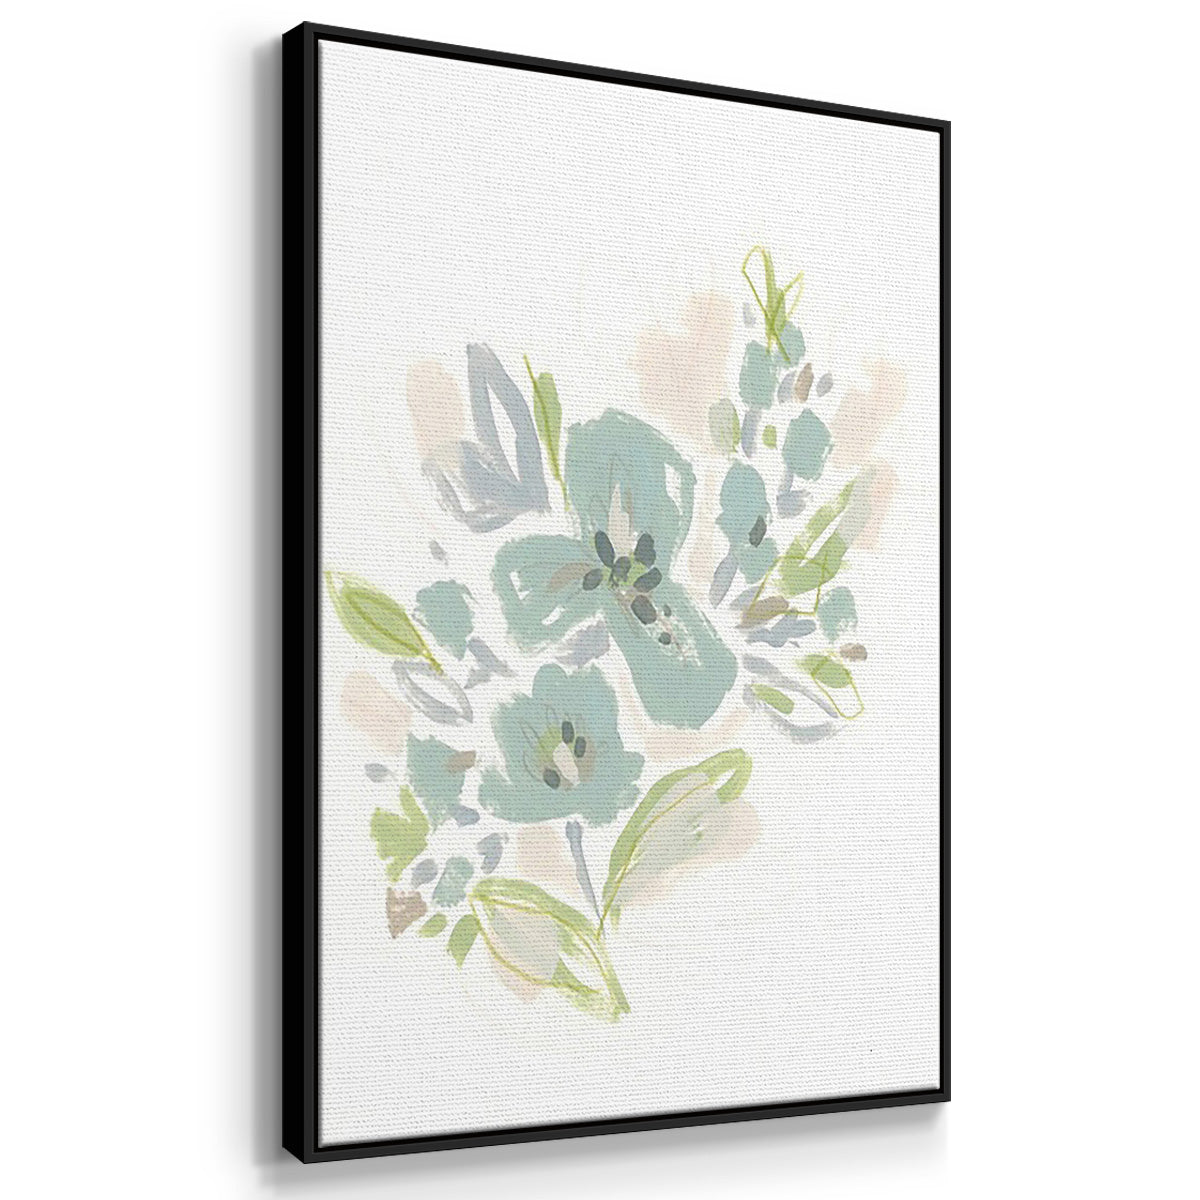 Seafoam Petals I - Framed Premium Gallery Wrapped Canvas L Frame 3 Piece Set - Ready to Hang